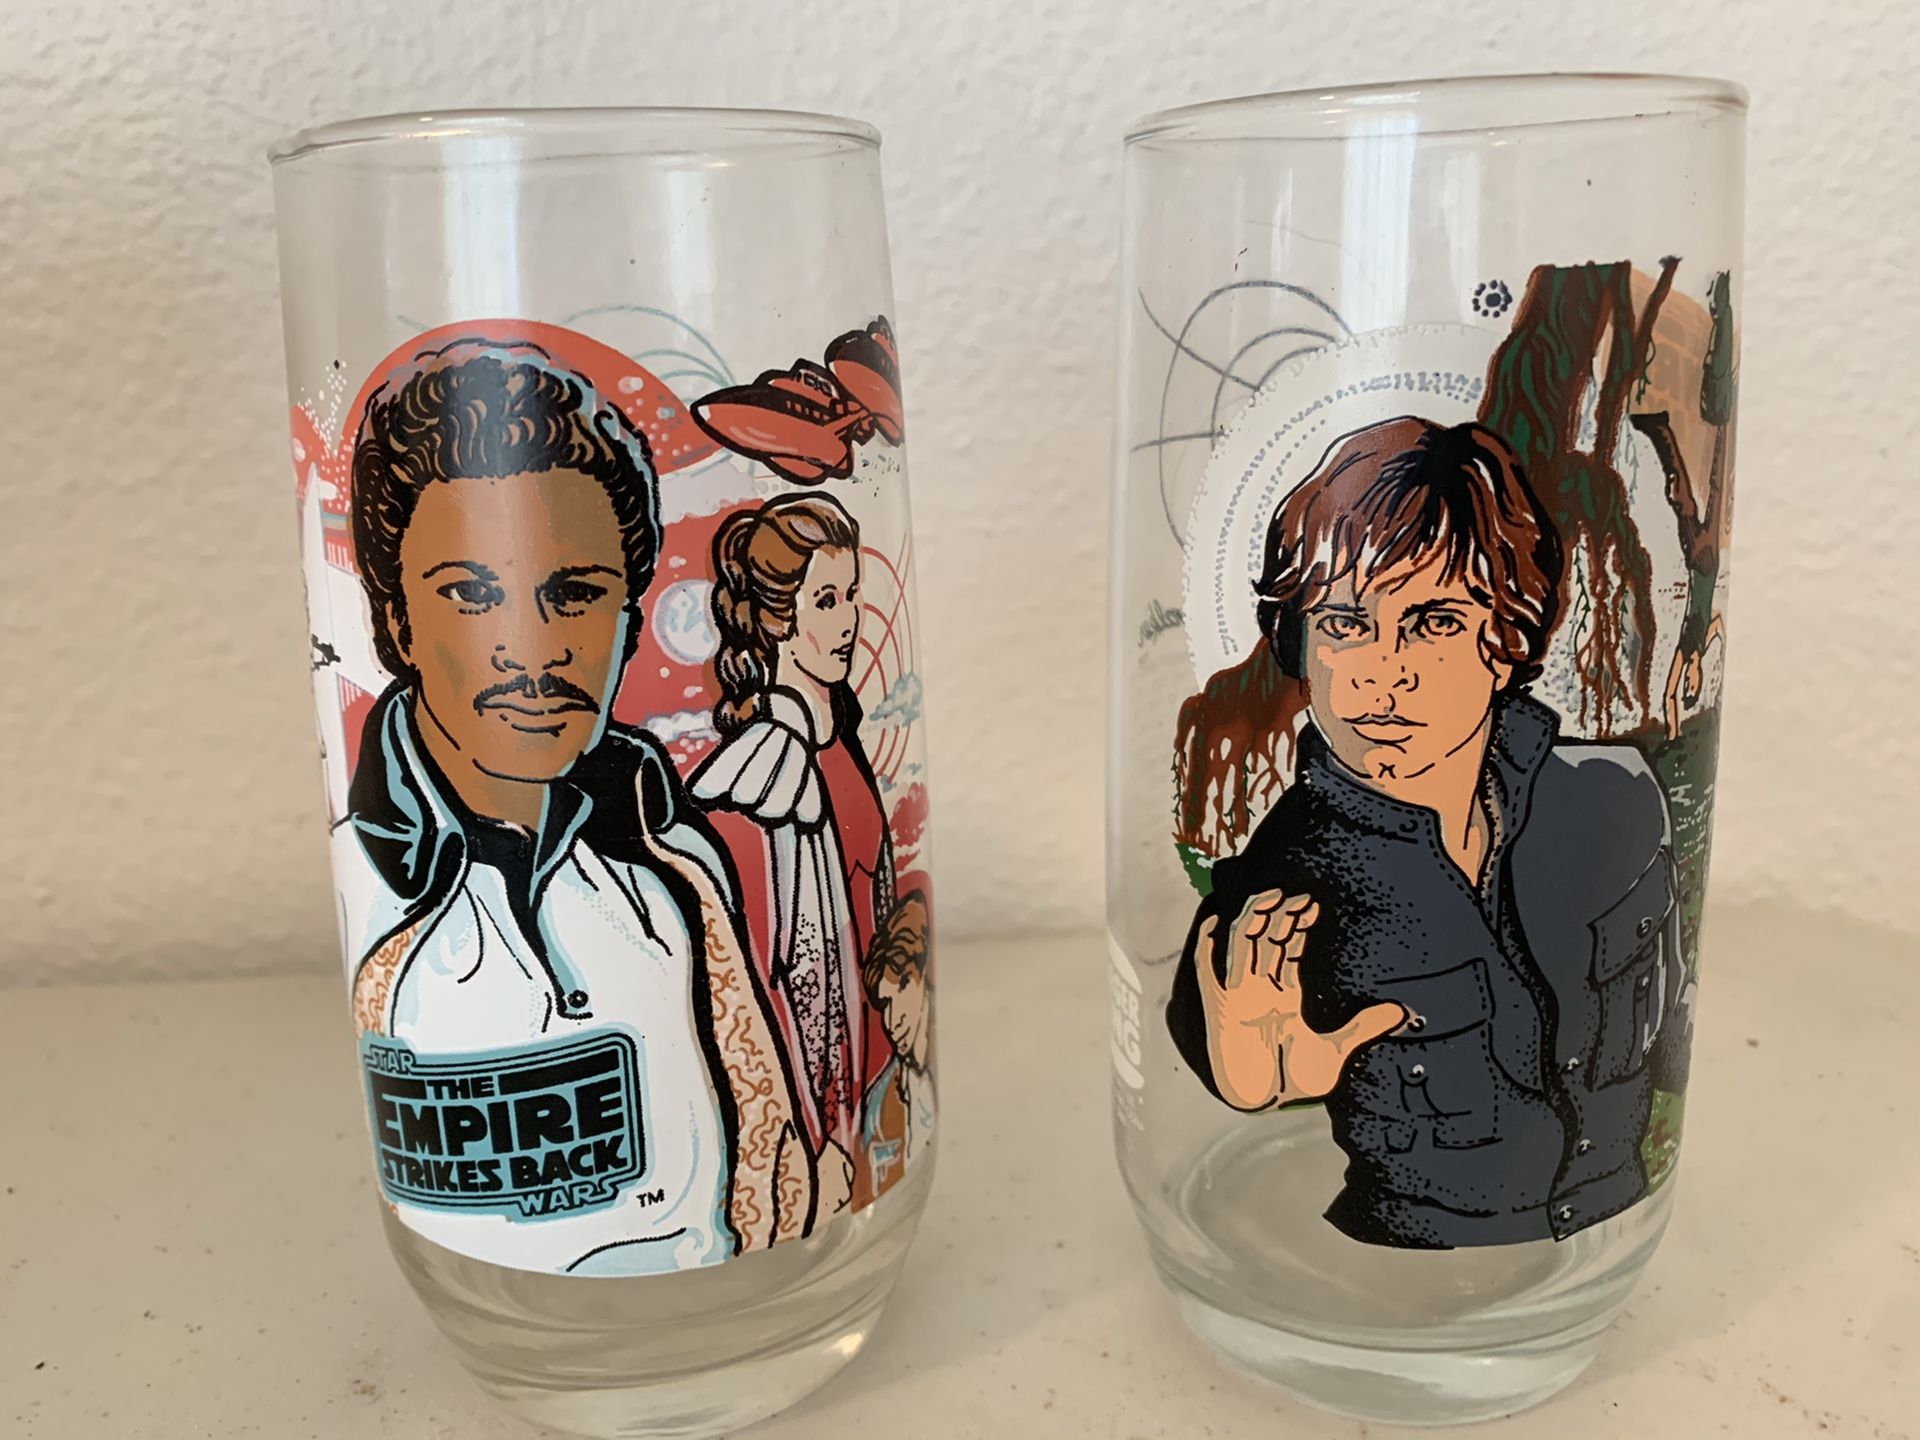 1980 Burger King Empire Strikes Back Collectors Series 2 Glasses Total